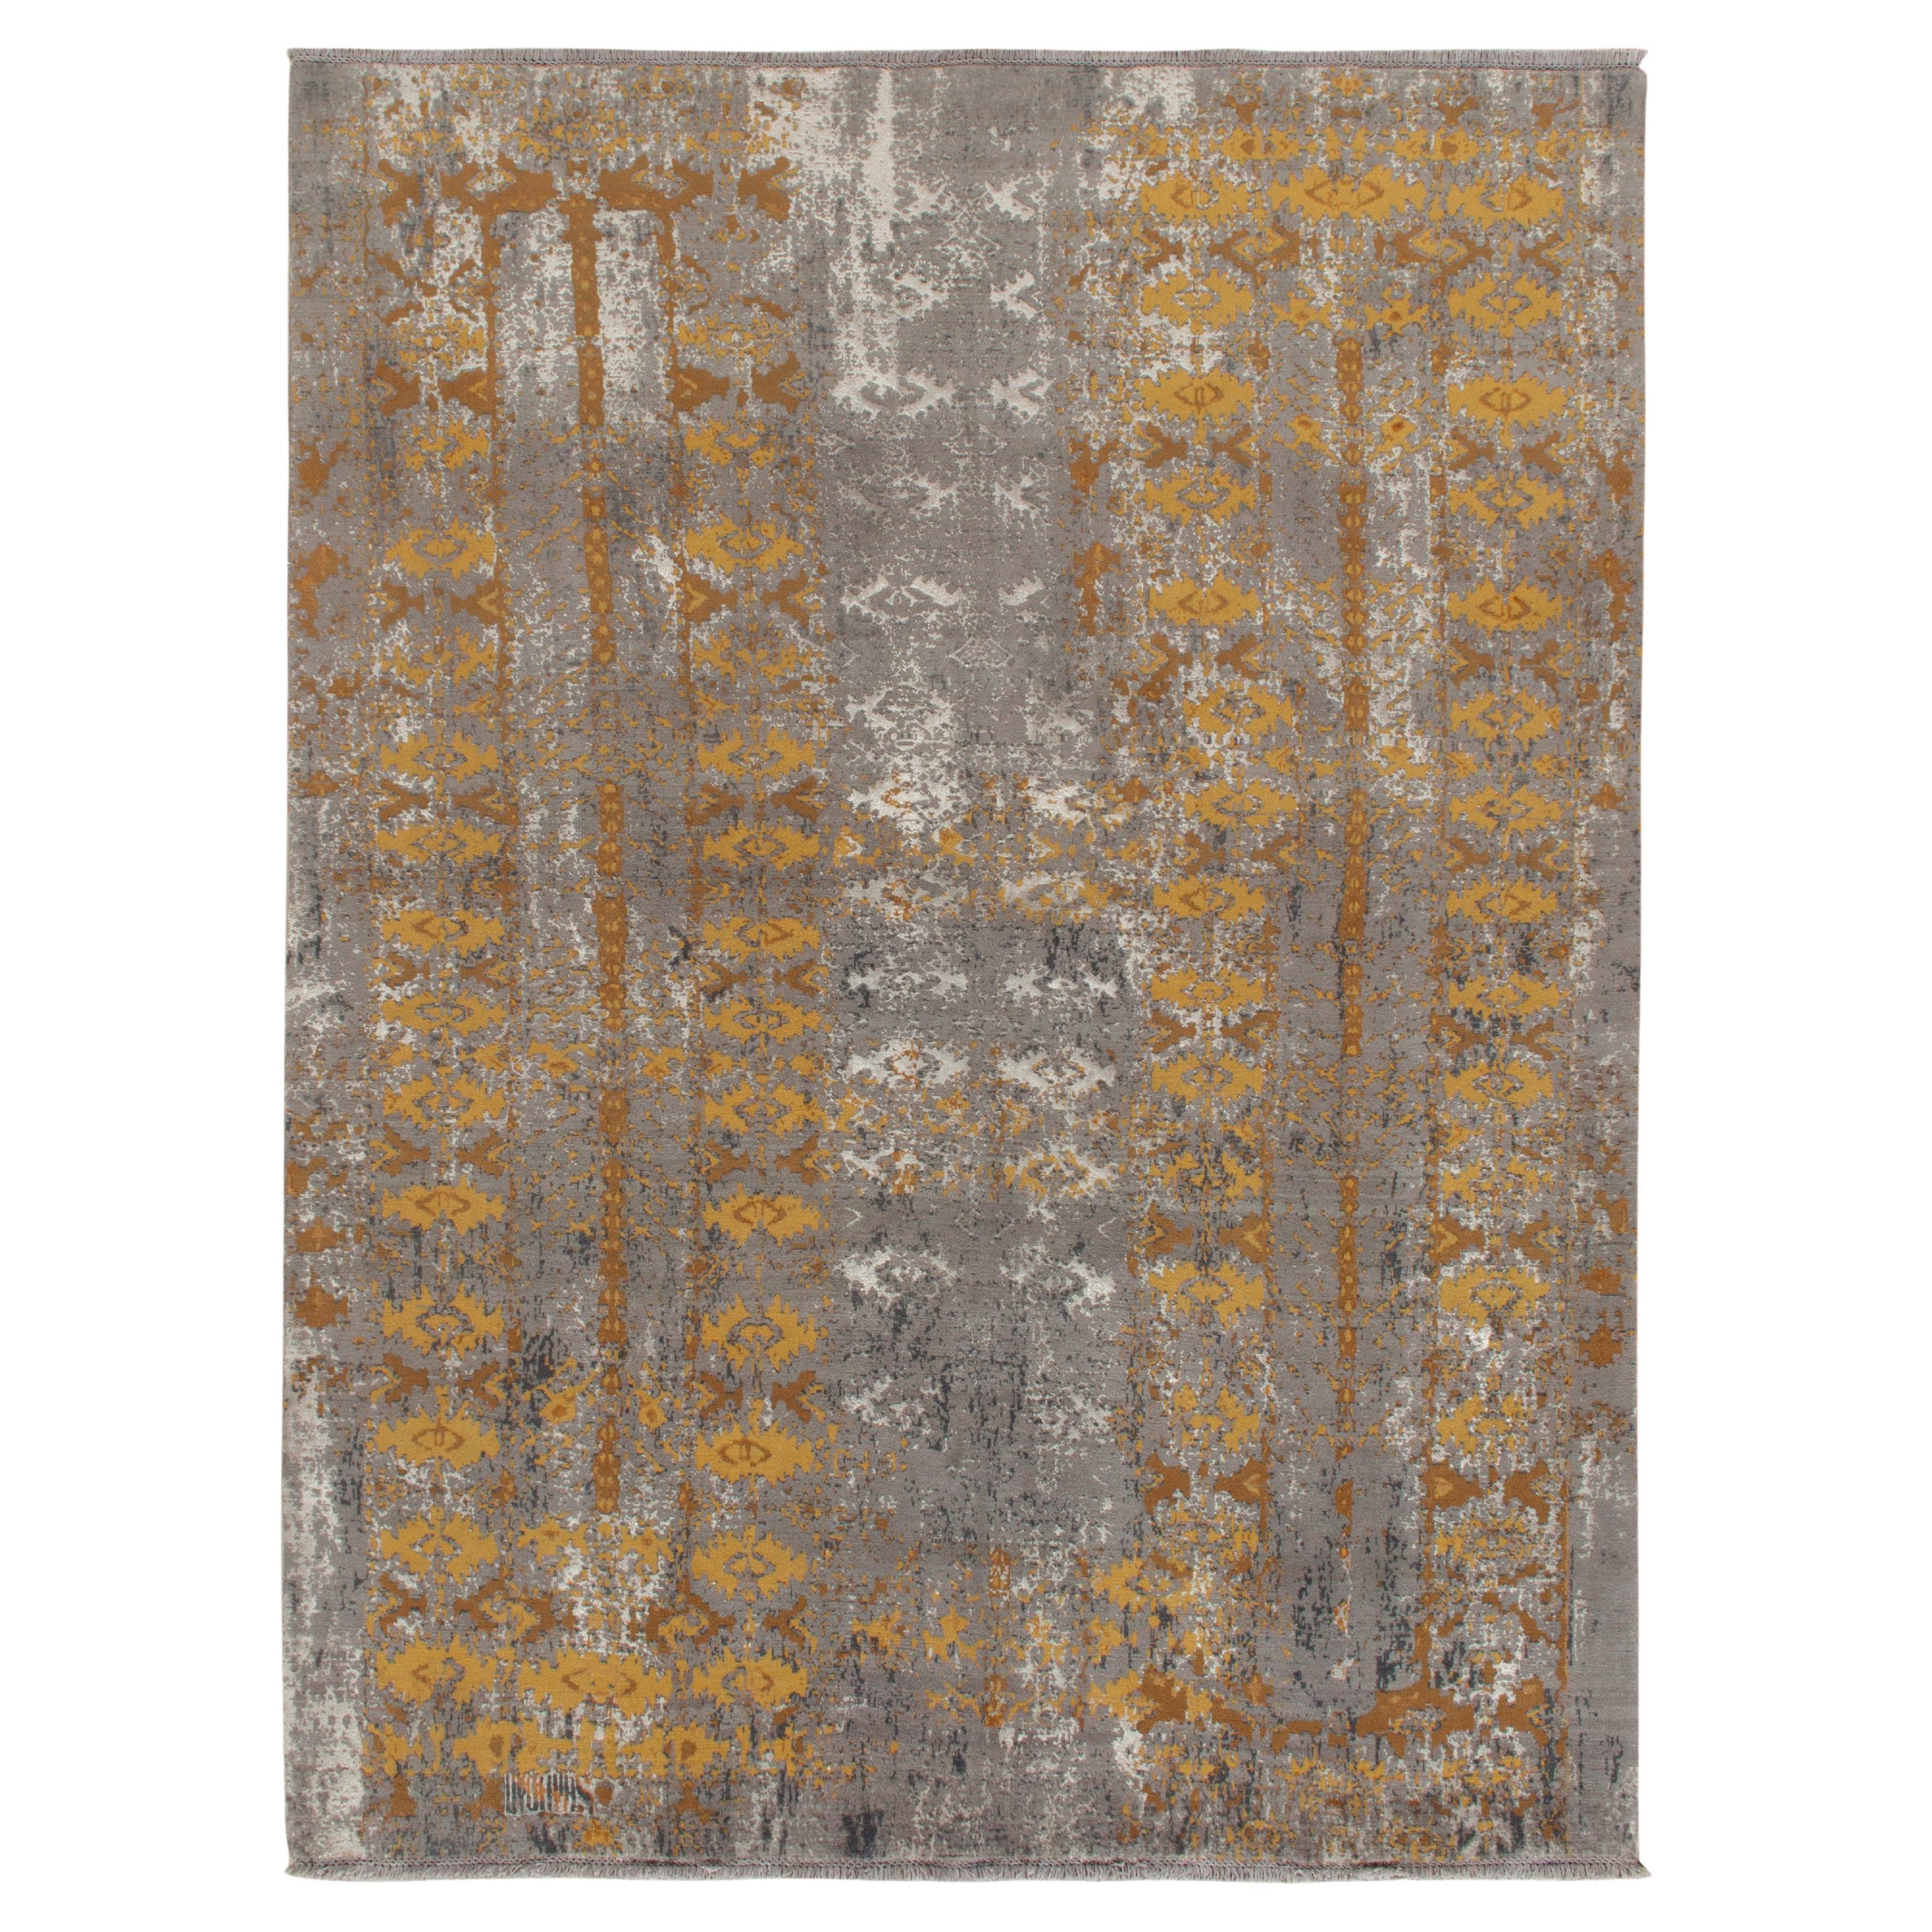 Rug & Kilim’s Abstract Rug in Gray, Gold & Beige-Brown All over Pattern For Sale